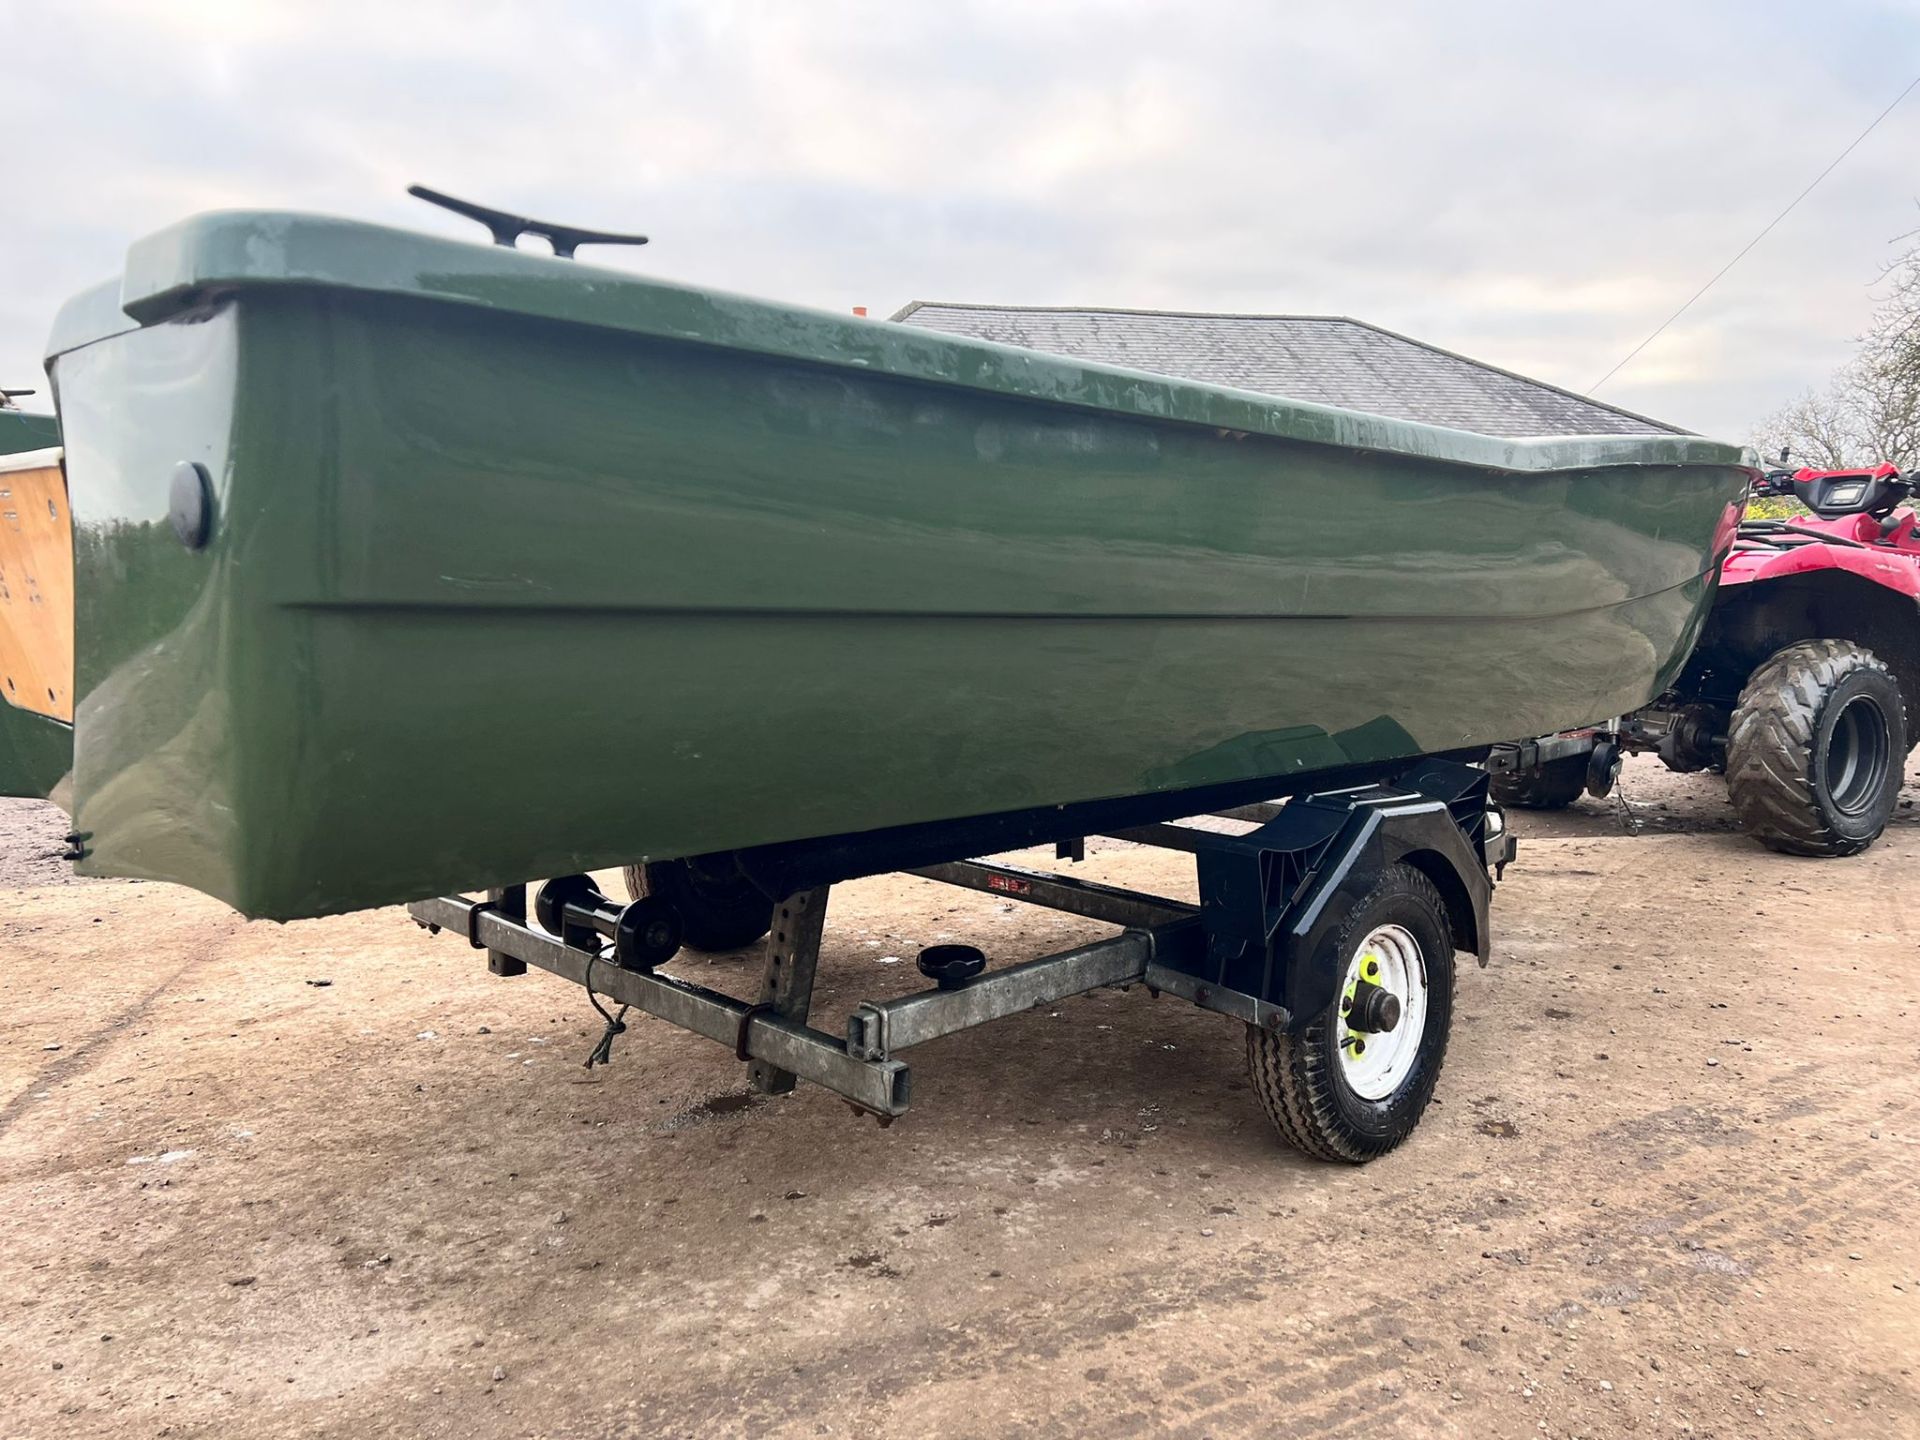 RIGFLEX AQUAPECHE 370 BOAT ON INDESPENSION MERIT SINGLE AXEL SPORT BOAT TRAILER WITH WINCH *PLUS VAT - Image 10 of 13